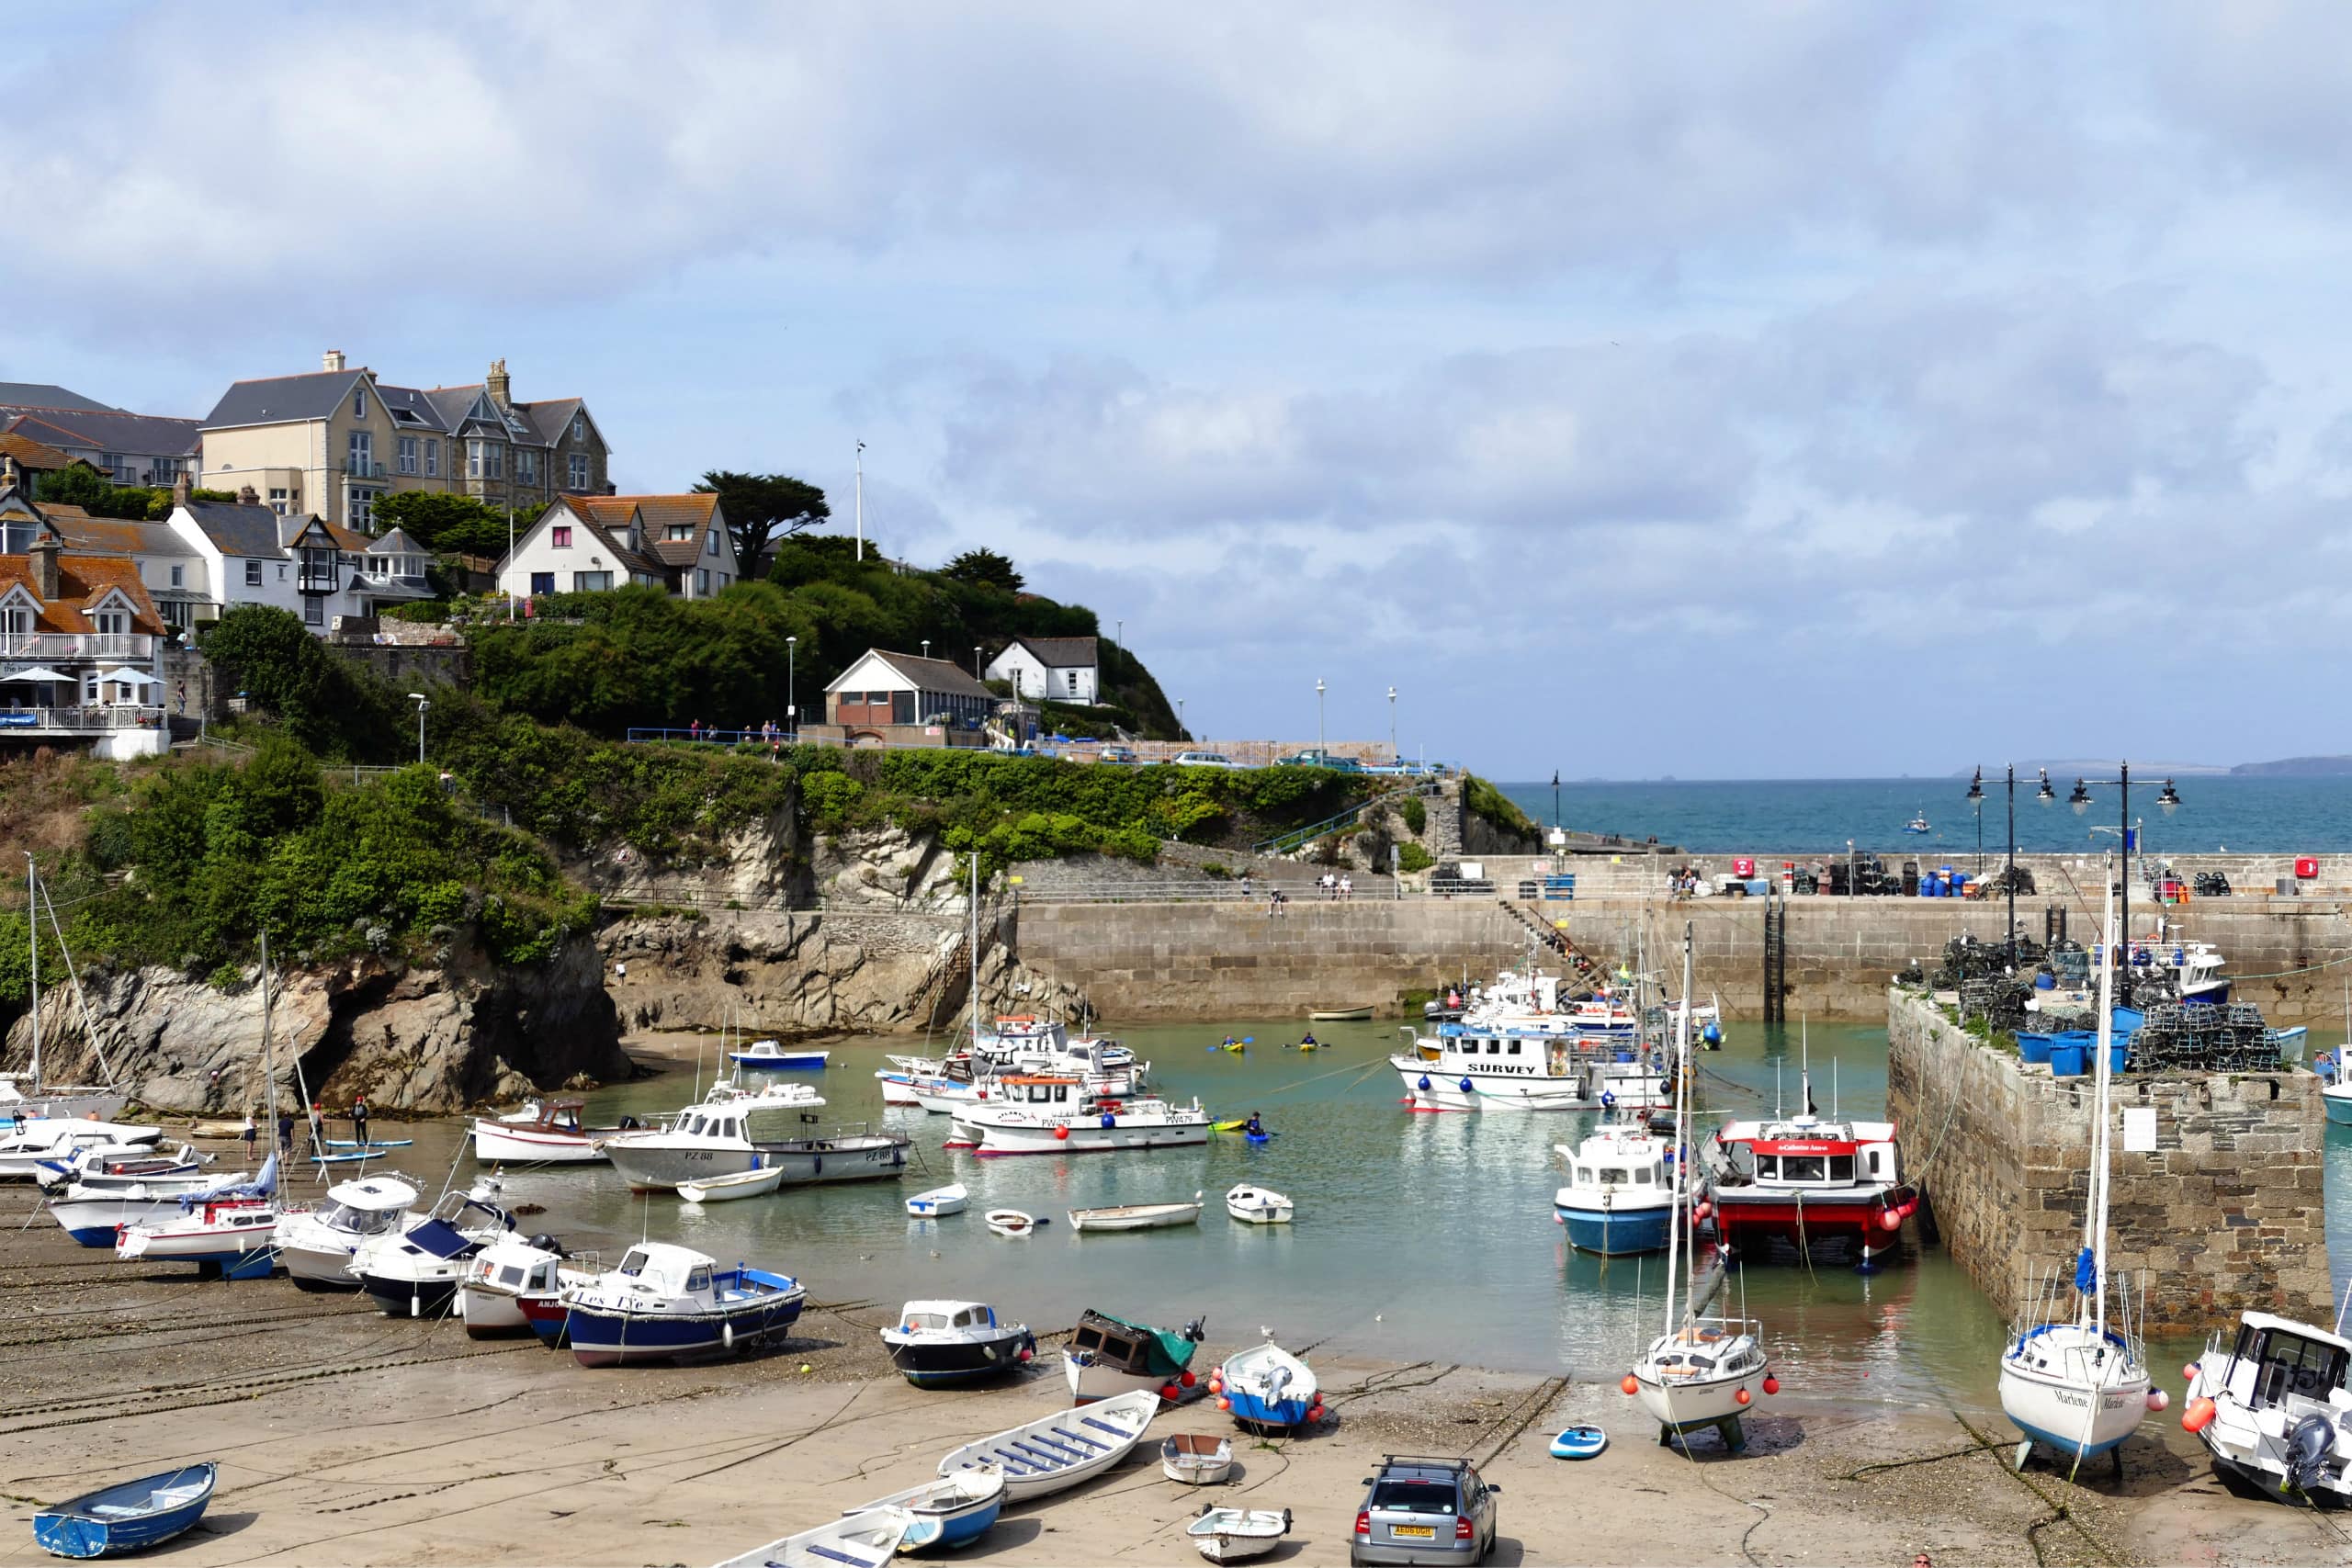 The harbourside of Newquay, Cornwall